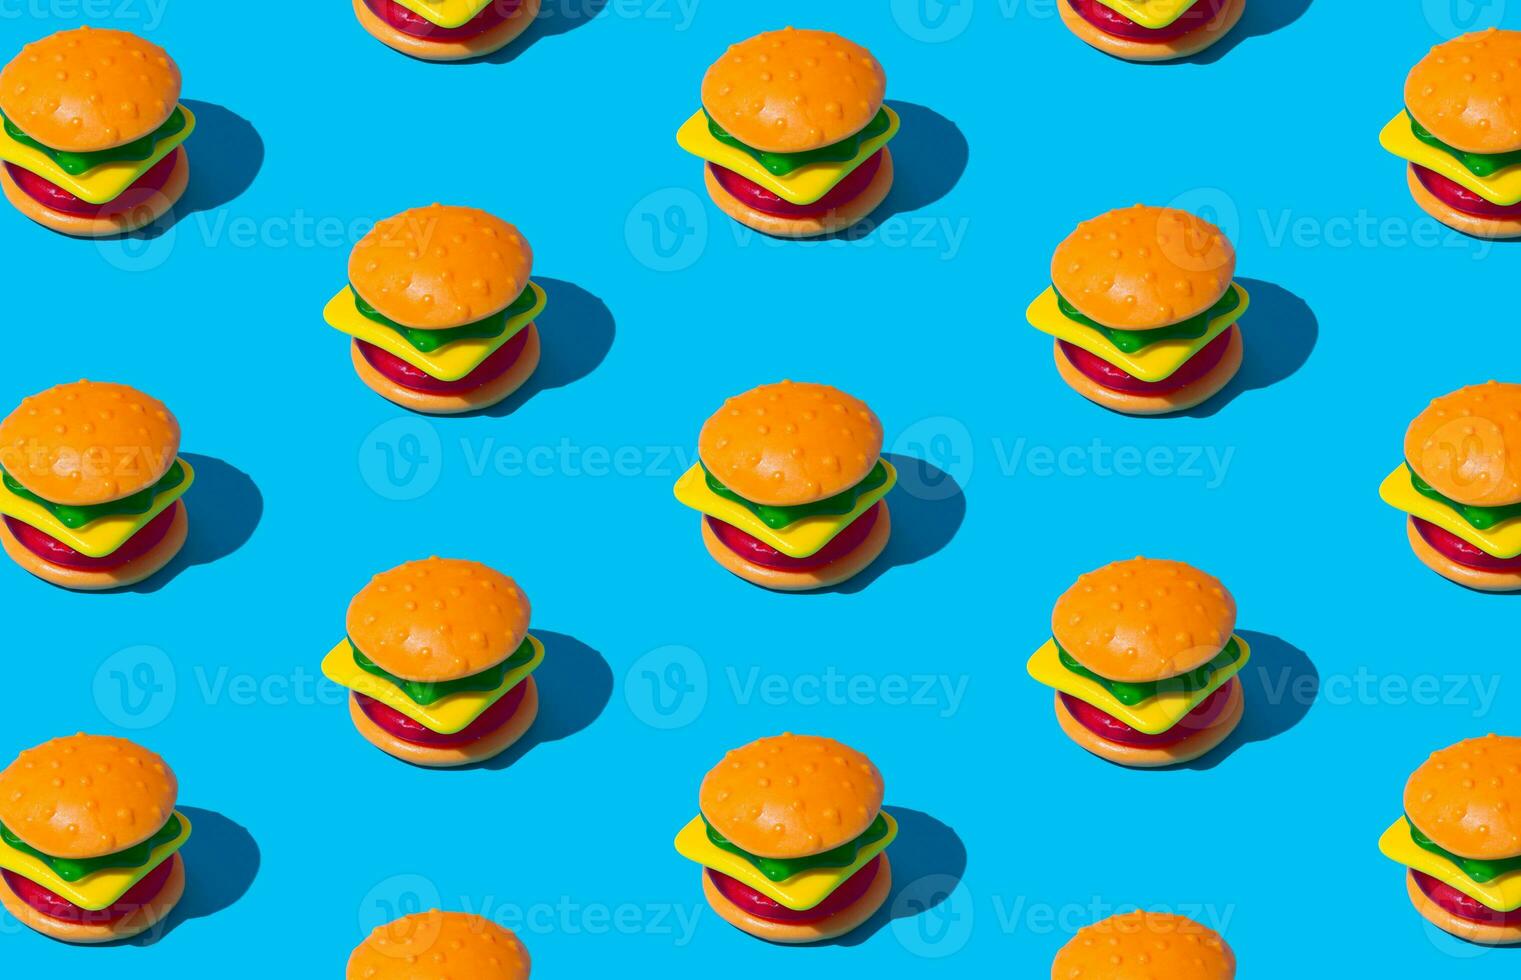 Creative pattern composition of big burger made of colorful gummy candies on blue background. Minimal food concept. Tasty jelly sweets idea. Gummy candies aesthetic. photo